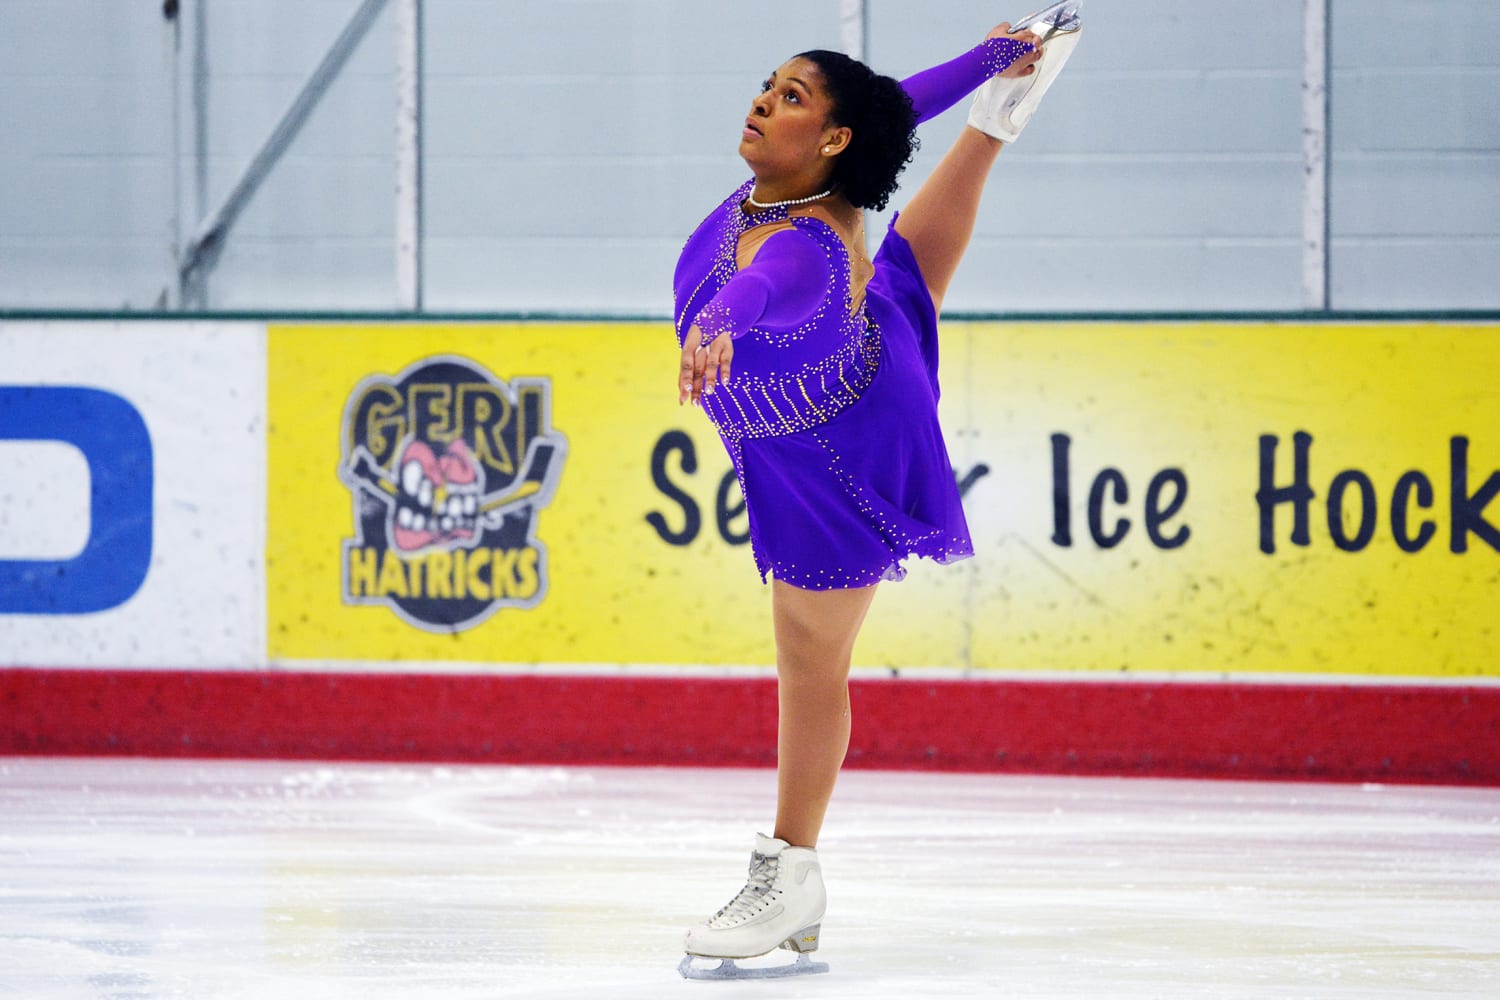 We dont look like them Black figure skaters face barriers to entry from a young age